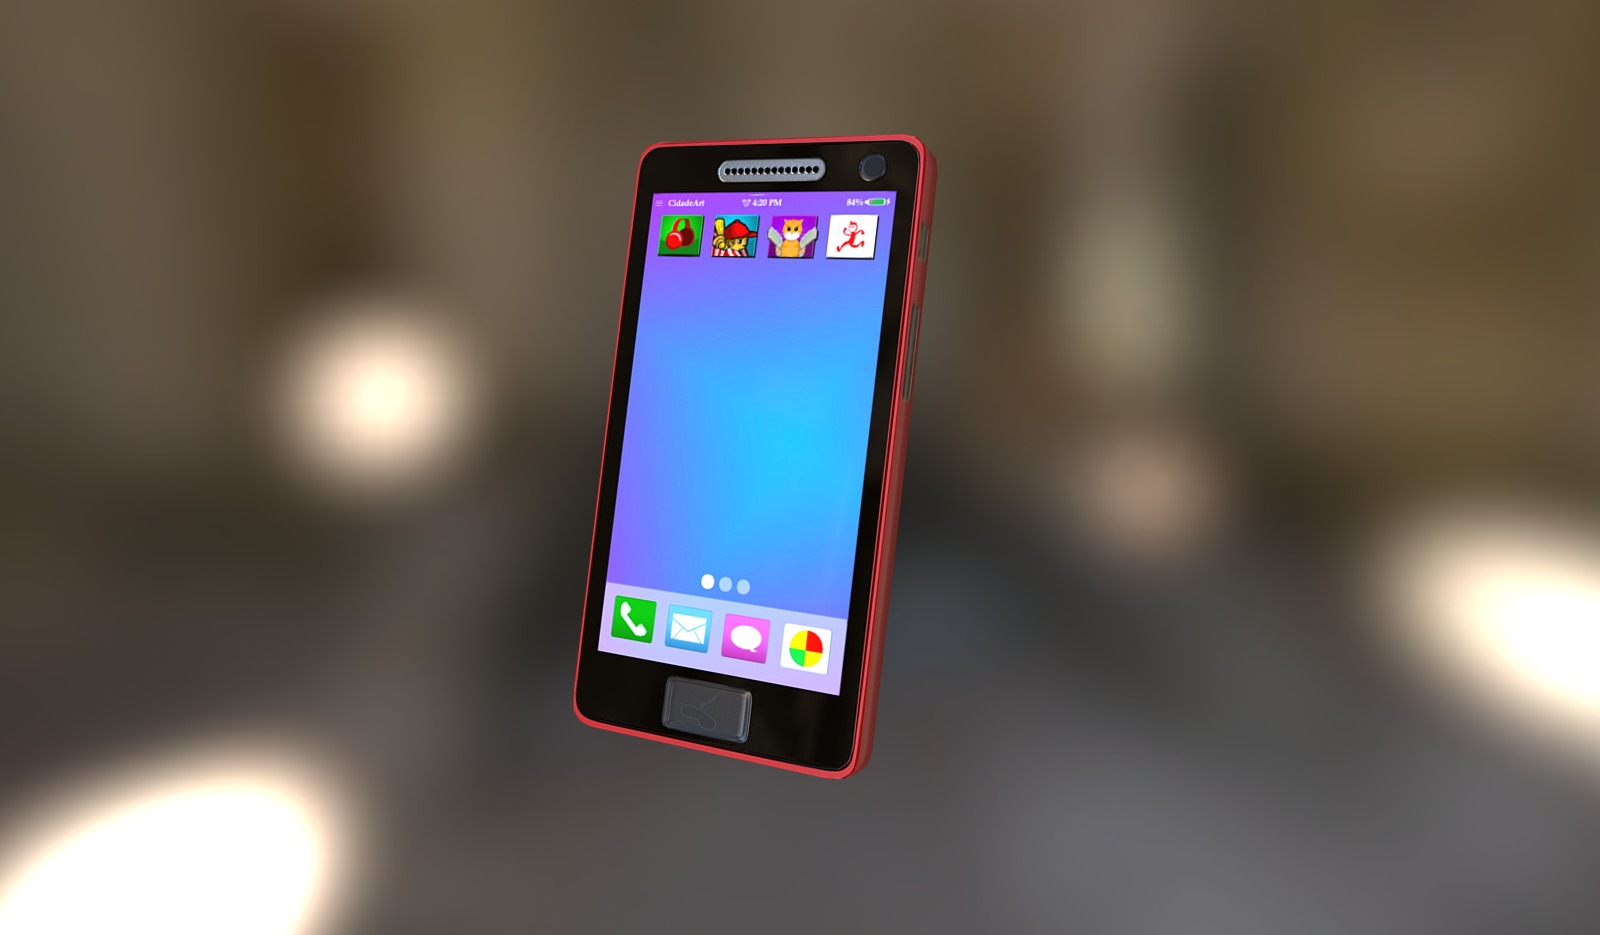 Low Poly 3d Modelled Phone with Company name and apps 3d model